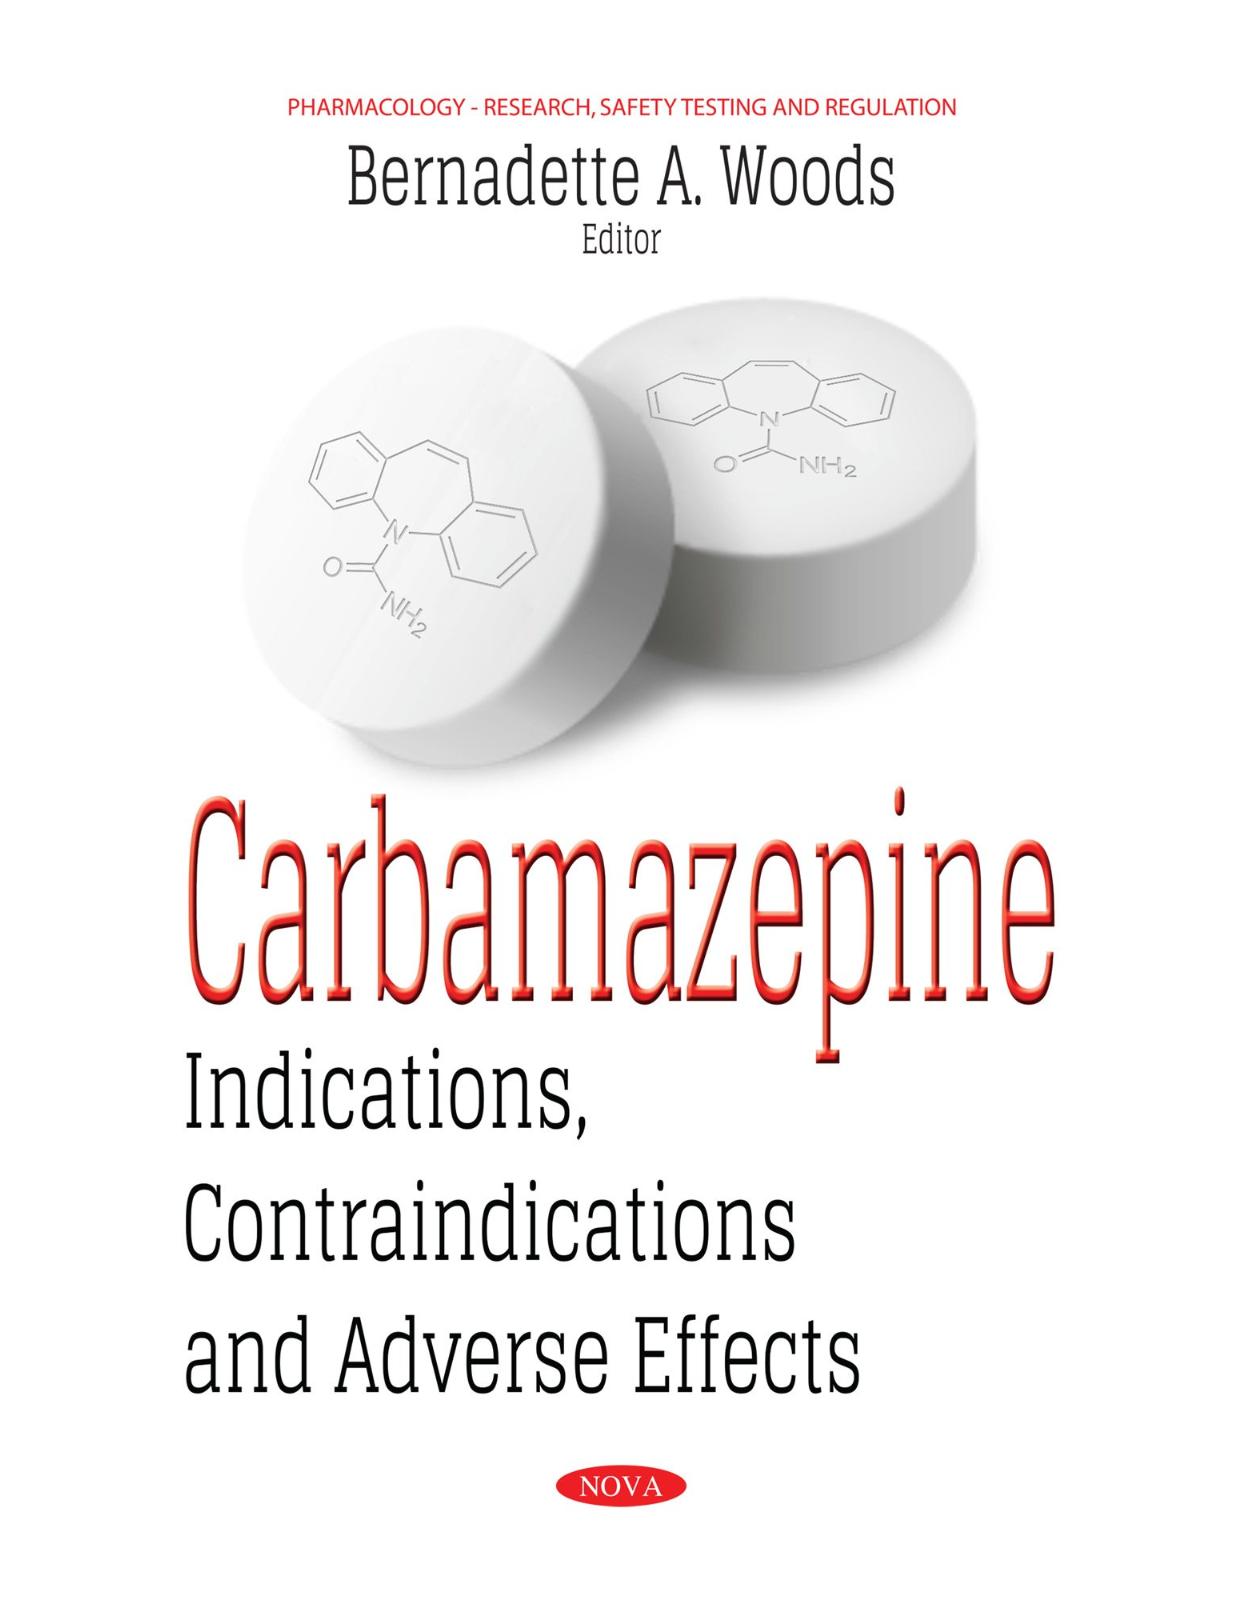 Carbamazepine: Indications, Contraindications & Adverse Effects 